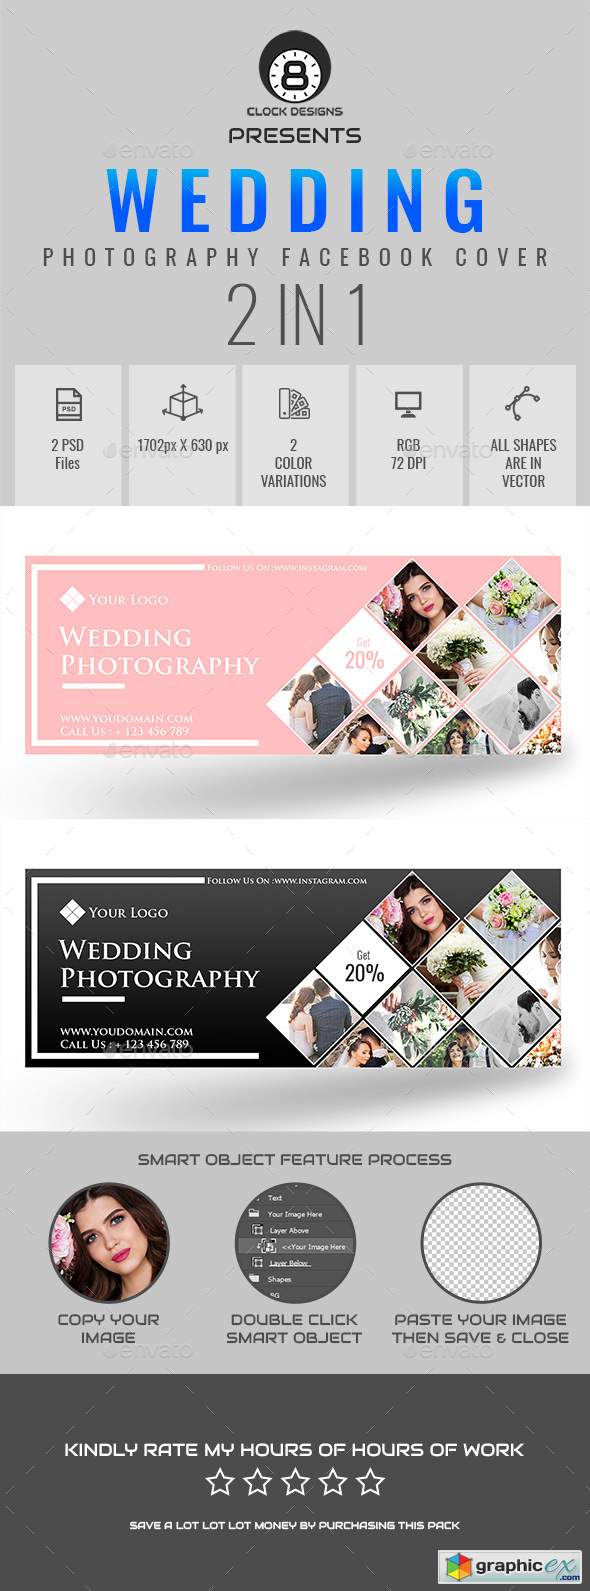 Wedding Photography Facebook Timeline Cover ( 2 in 1 )